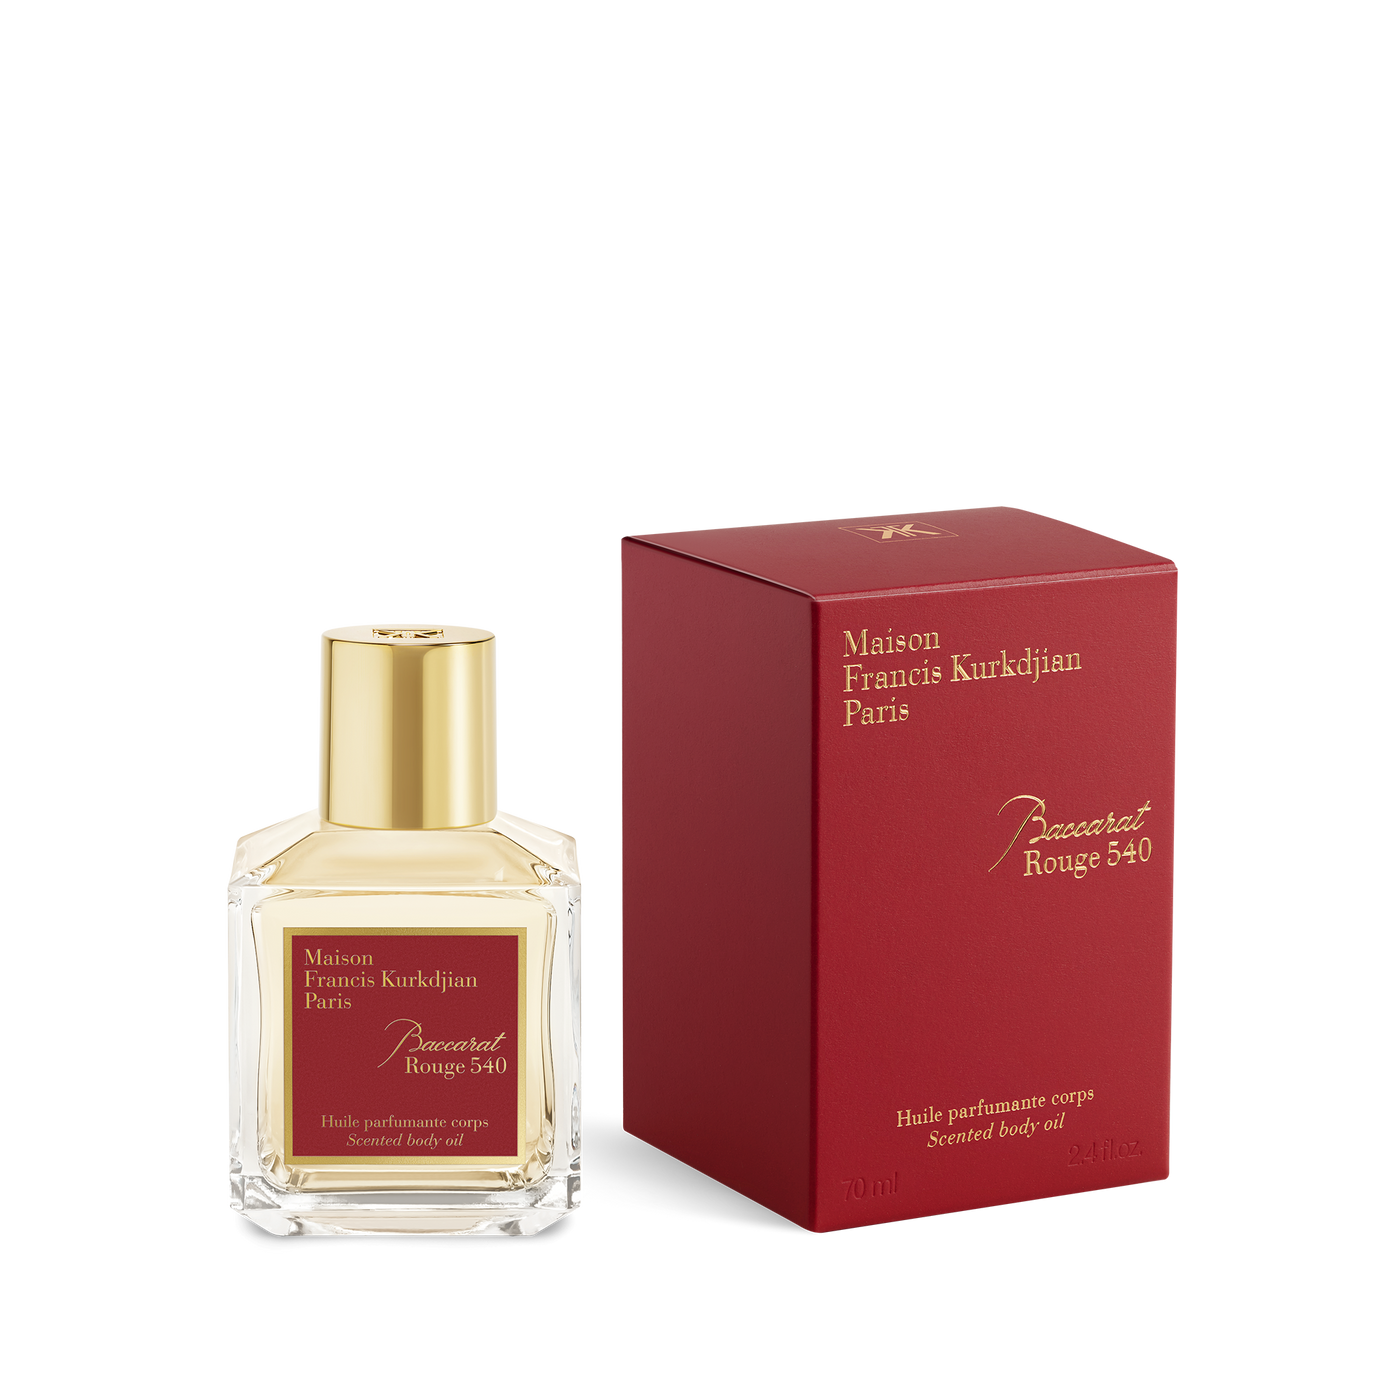 Baccarat Rouge 540 - Scented body oil